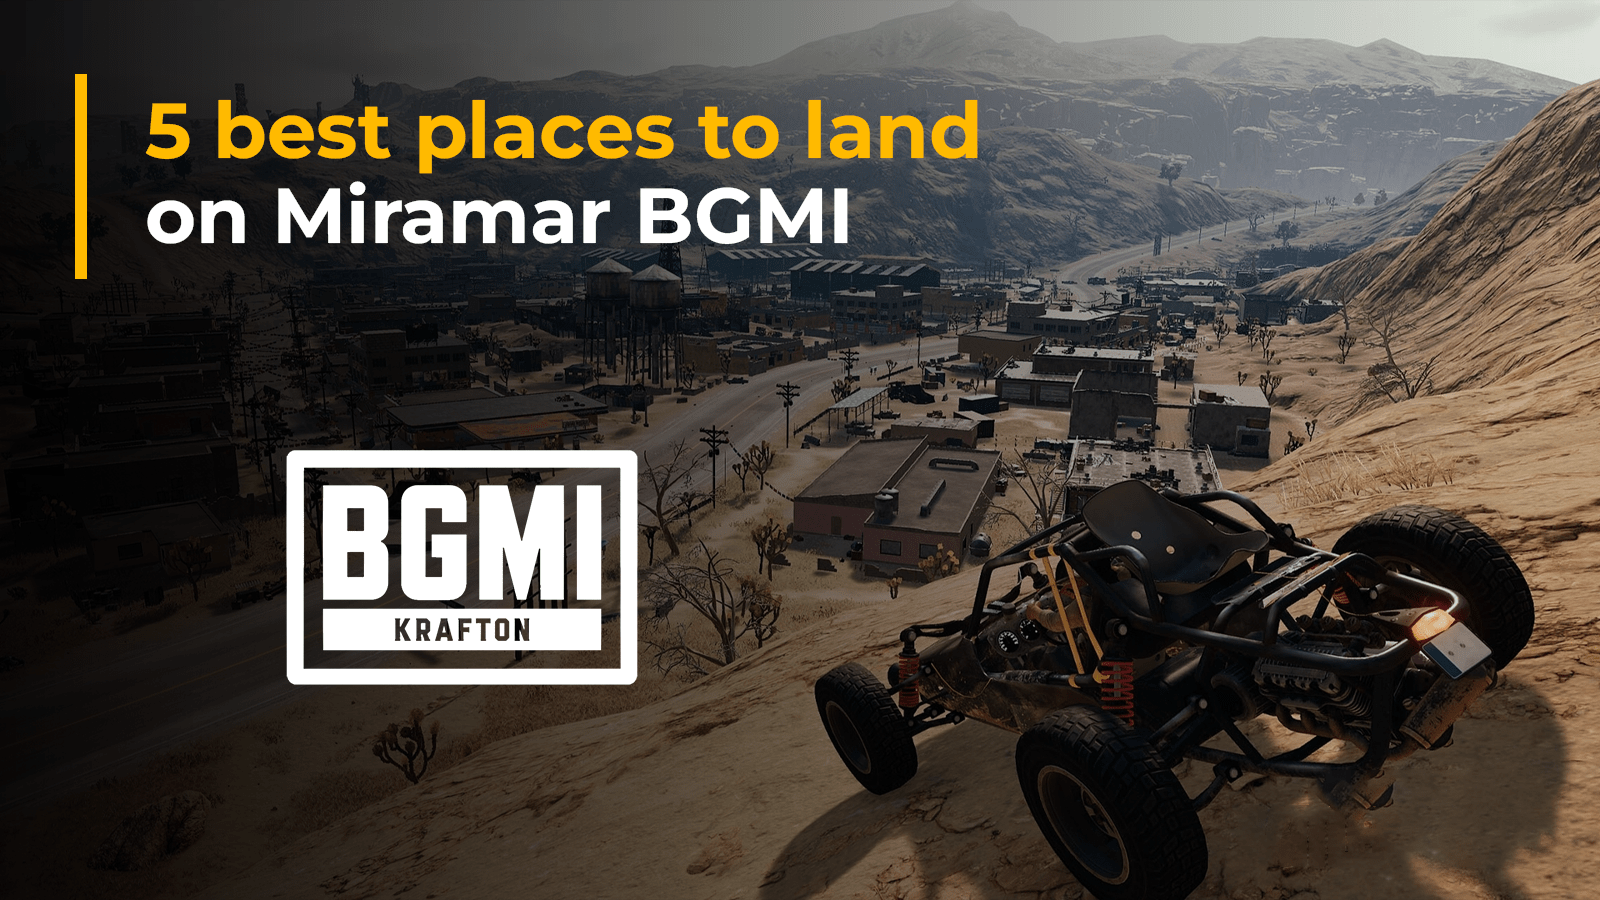 5 Best Places to Land on Miramar in BGMI